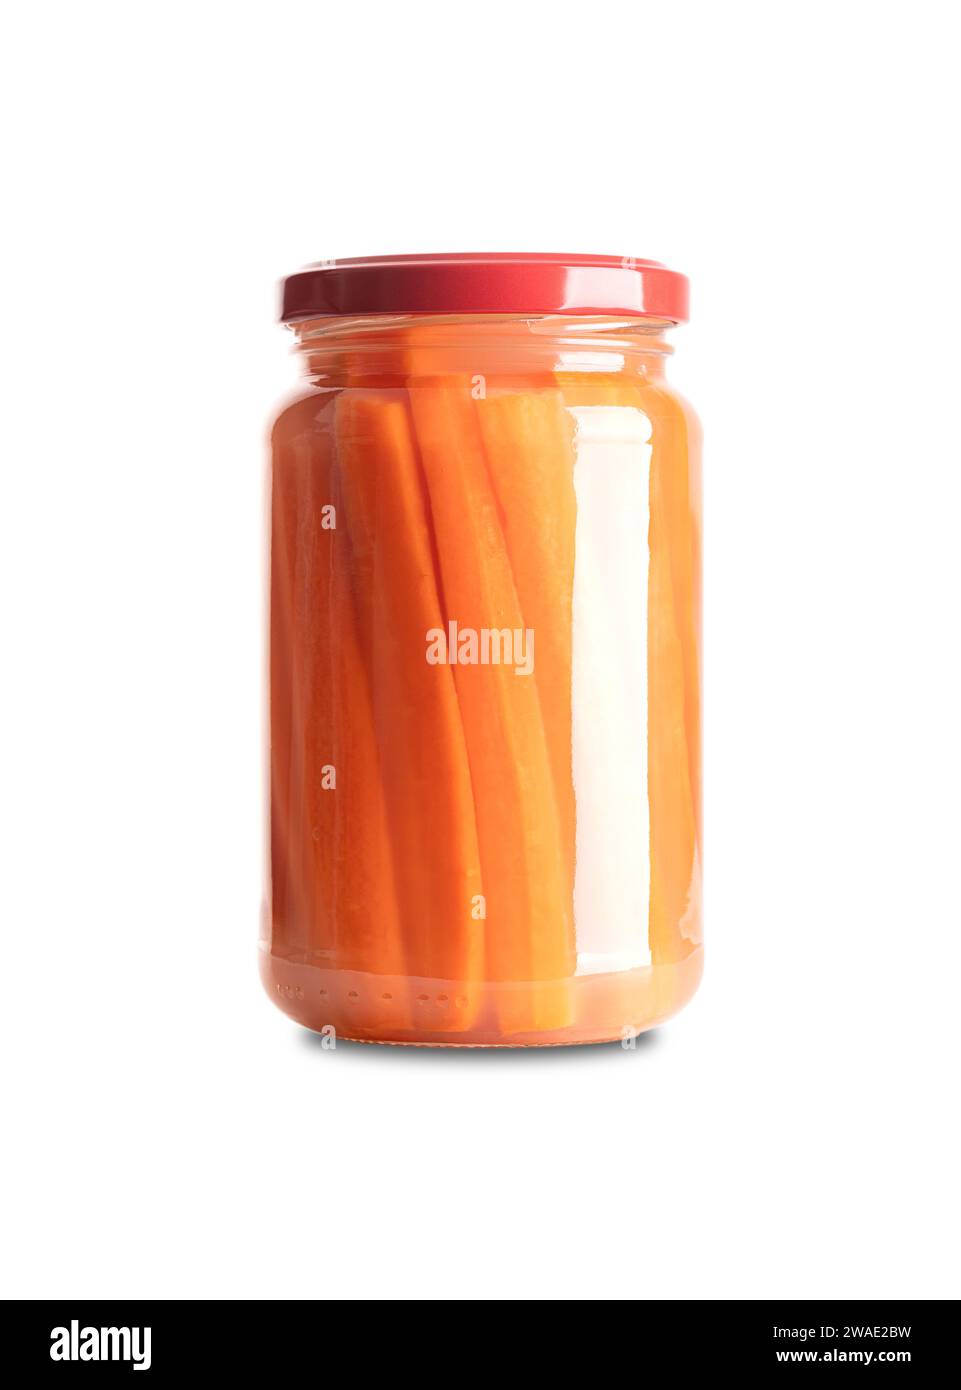 Carrot sticks, homemade fermented carrots, in glass jar with lid. Carrots cut into sticks, fermented by lactic acid bacteria. Stock Photo